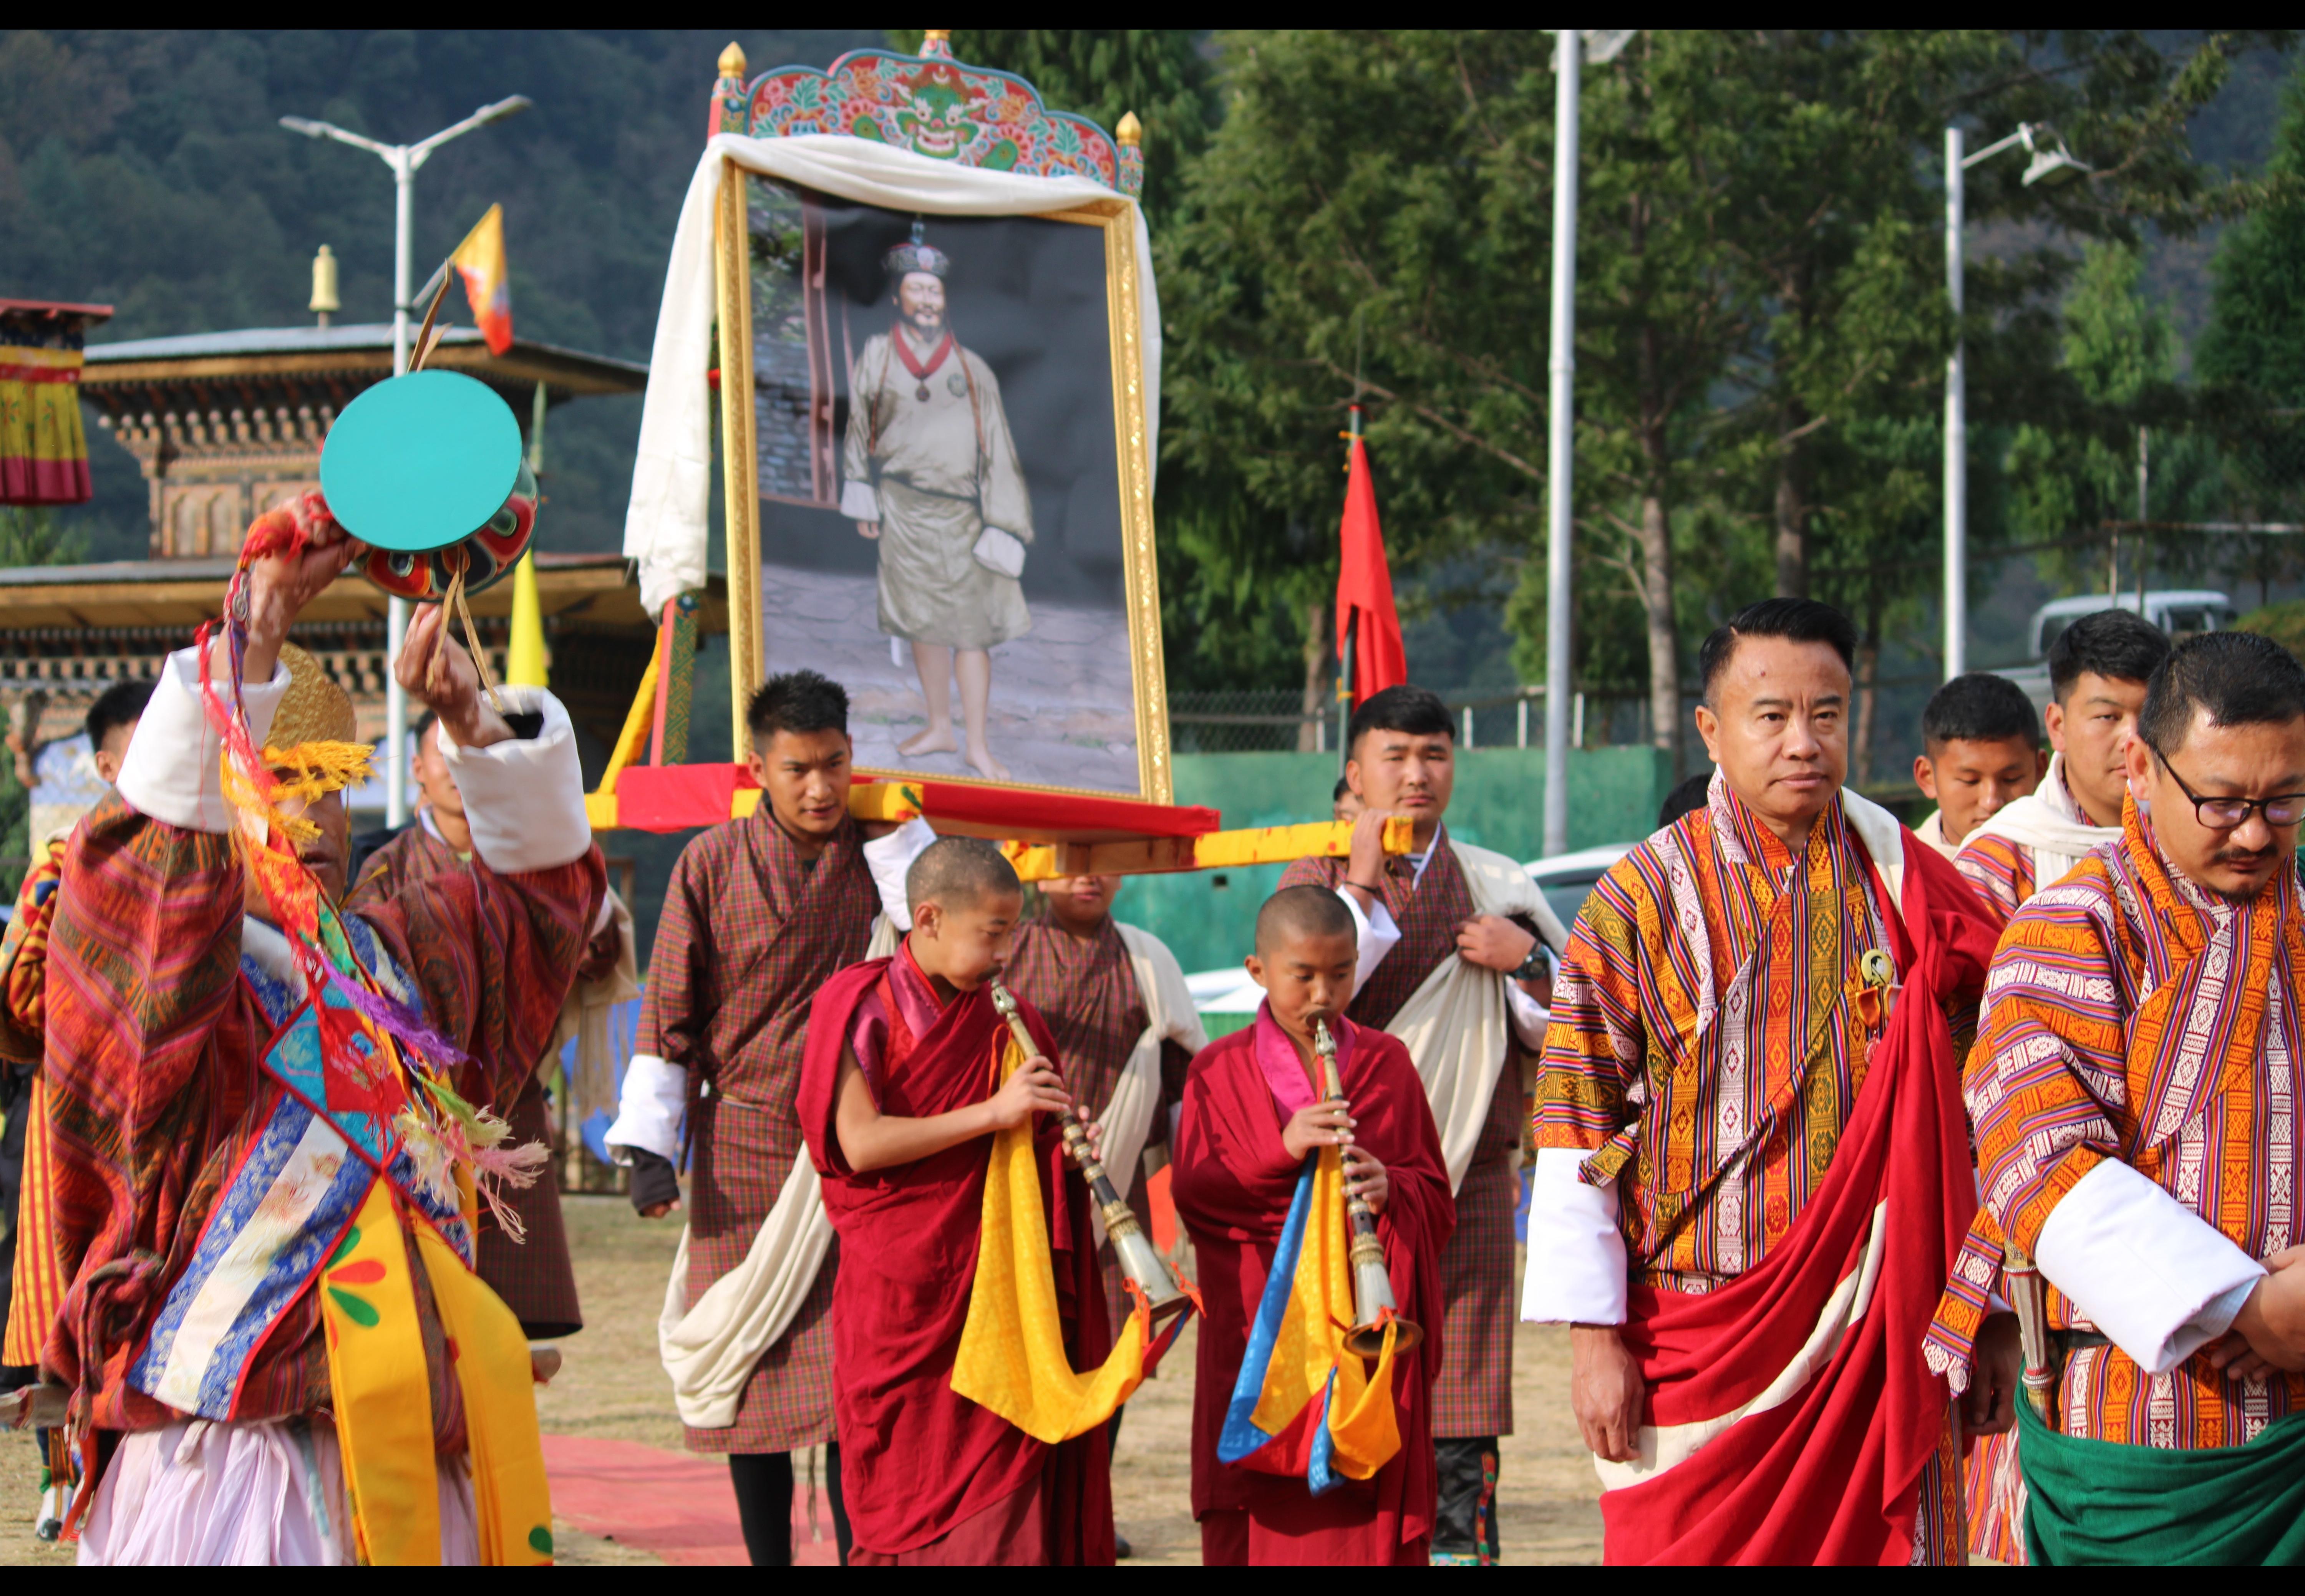 On The Auspicious And Joyous Occasion Of 115th National Day, The Public, Civil Servants And The Dratshang  Rabdey of Trashi Yangtse Dzongkhag Joins The Nation To Celebrate And  Offer Our Solemn Prayers For Continued Peace, Prosperity and Harmony under the Wangchuck Dynasty And Re-Dedicate Ourselves To The  Service Of The Tsa-Wa-Sum.   Trashi Yangtse Dzongkhag Joins The Nation To Celebrate The 115th National Day On 17th December 2022